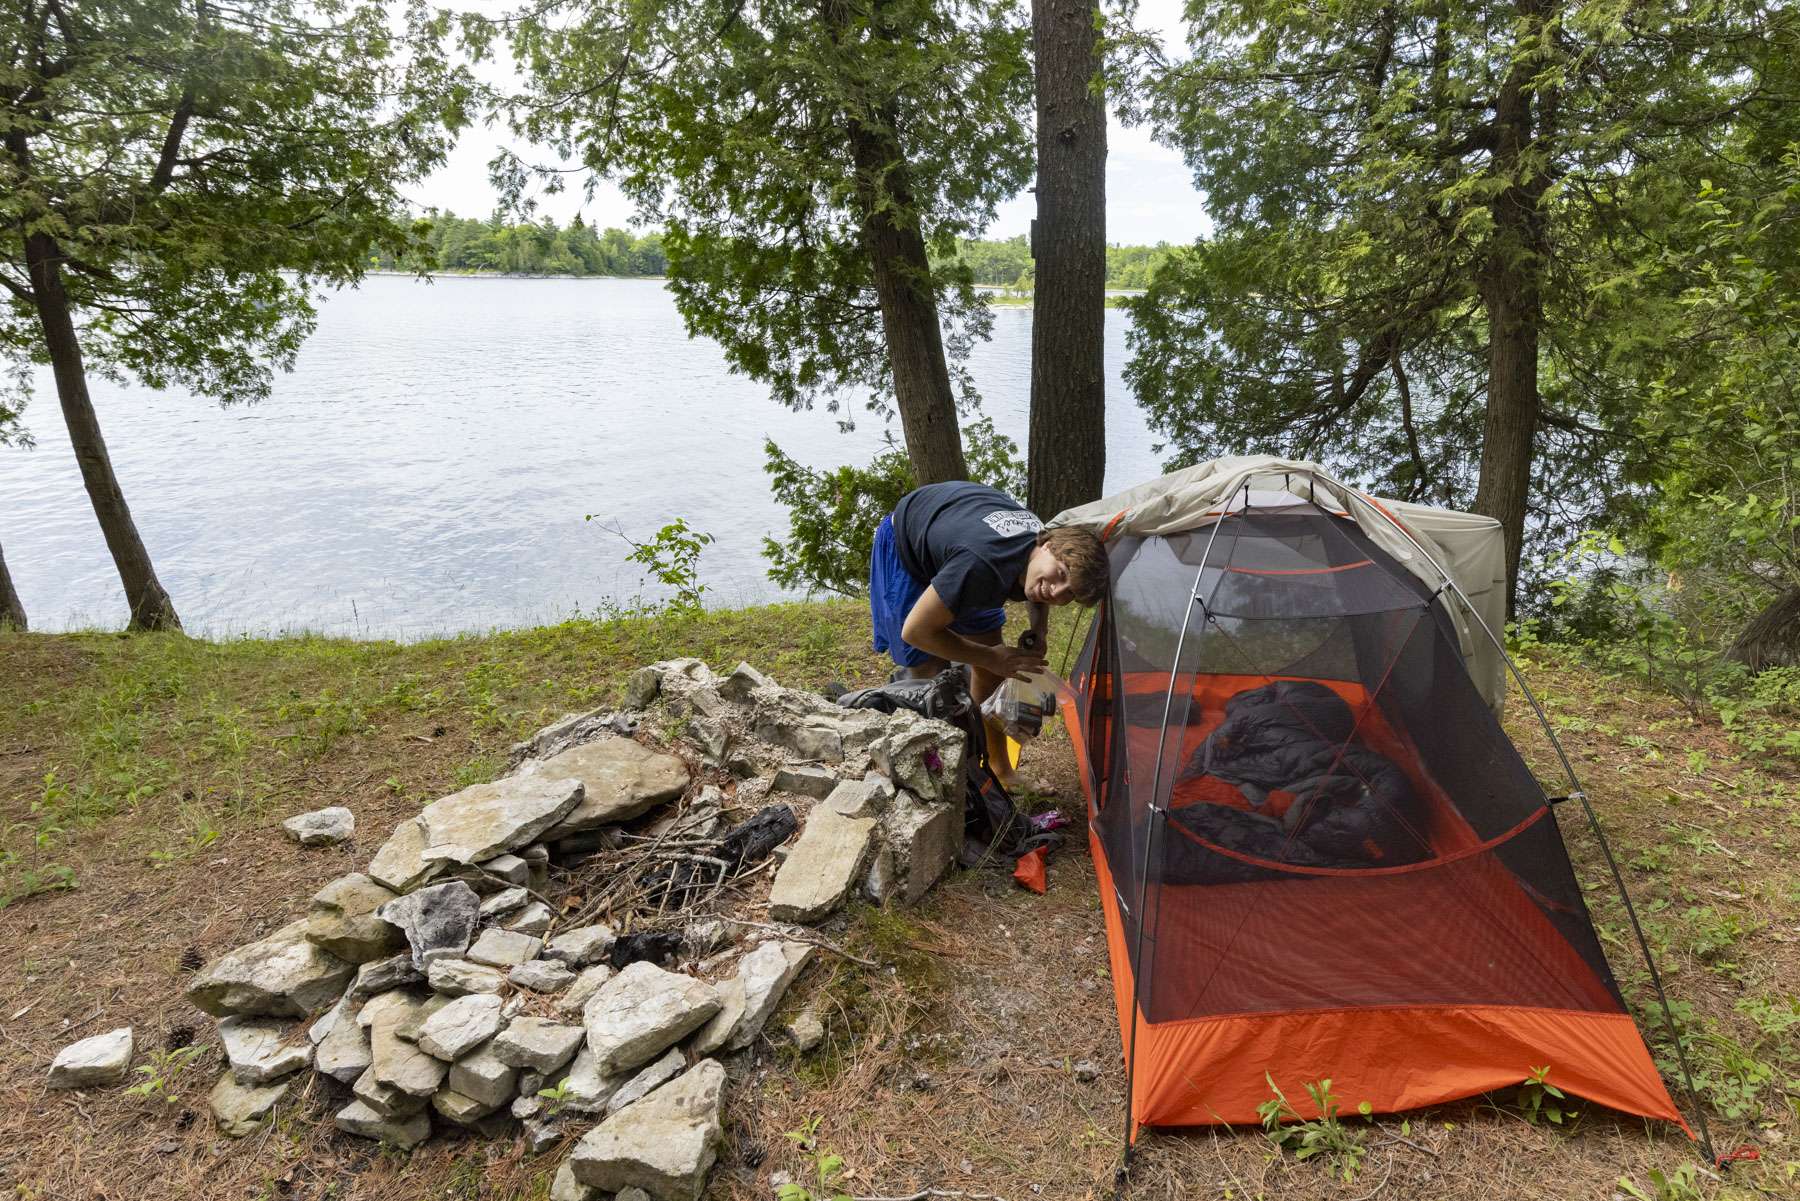 Explorer Intern Jak Krouse camped in a solo tent for the short stay on the island. 